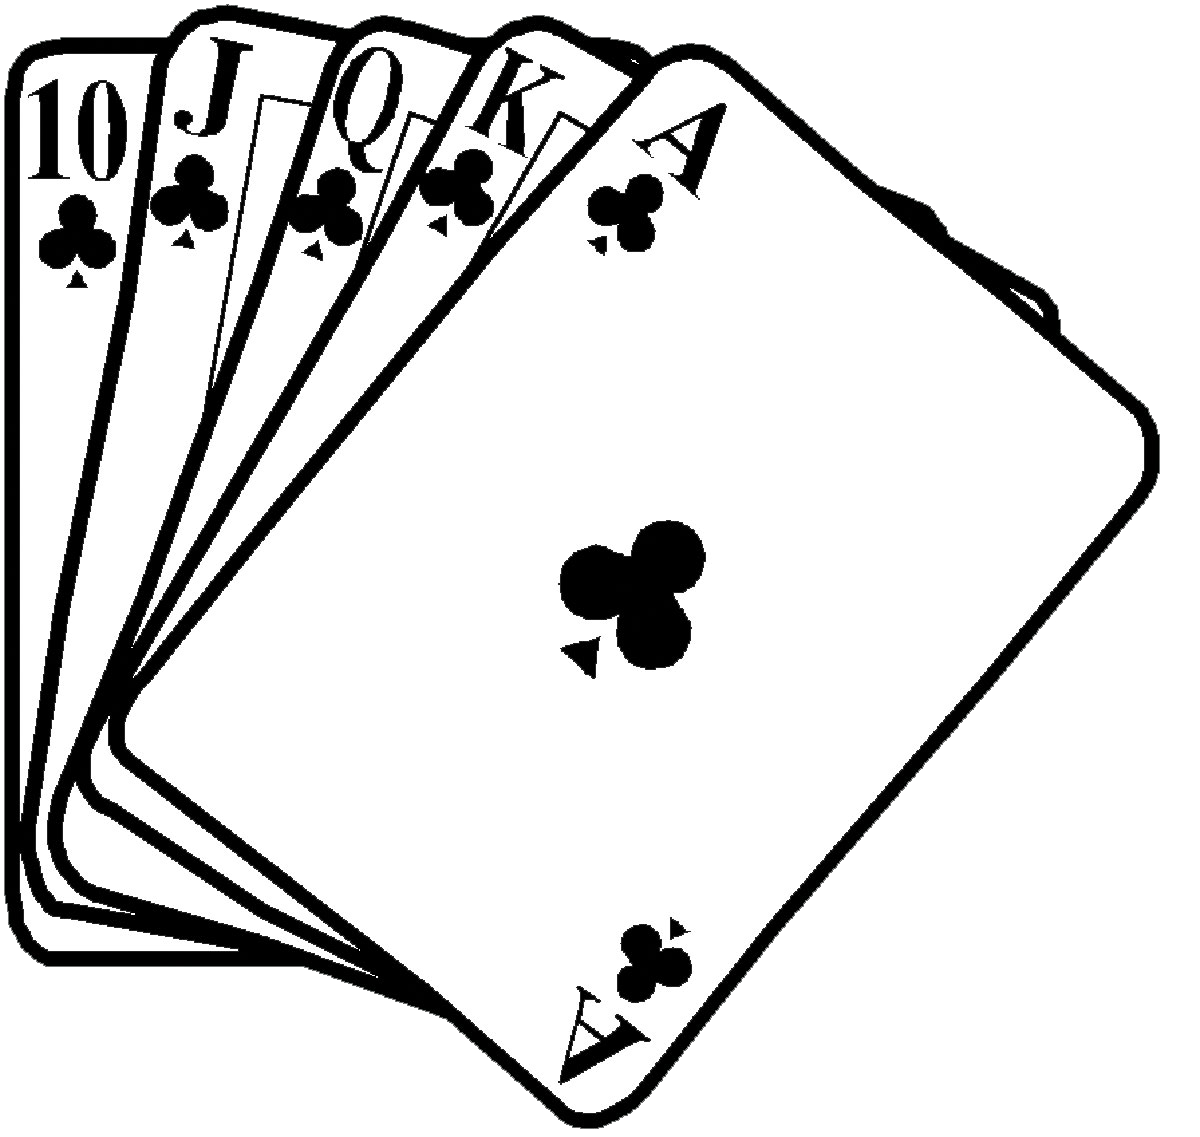 Pictures Of Poker Hands - ClipArt Best